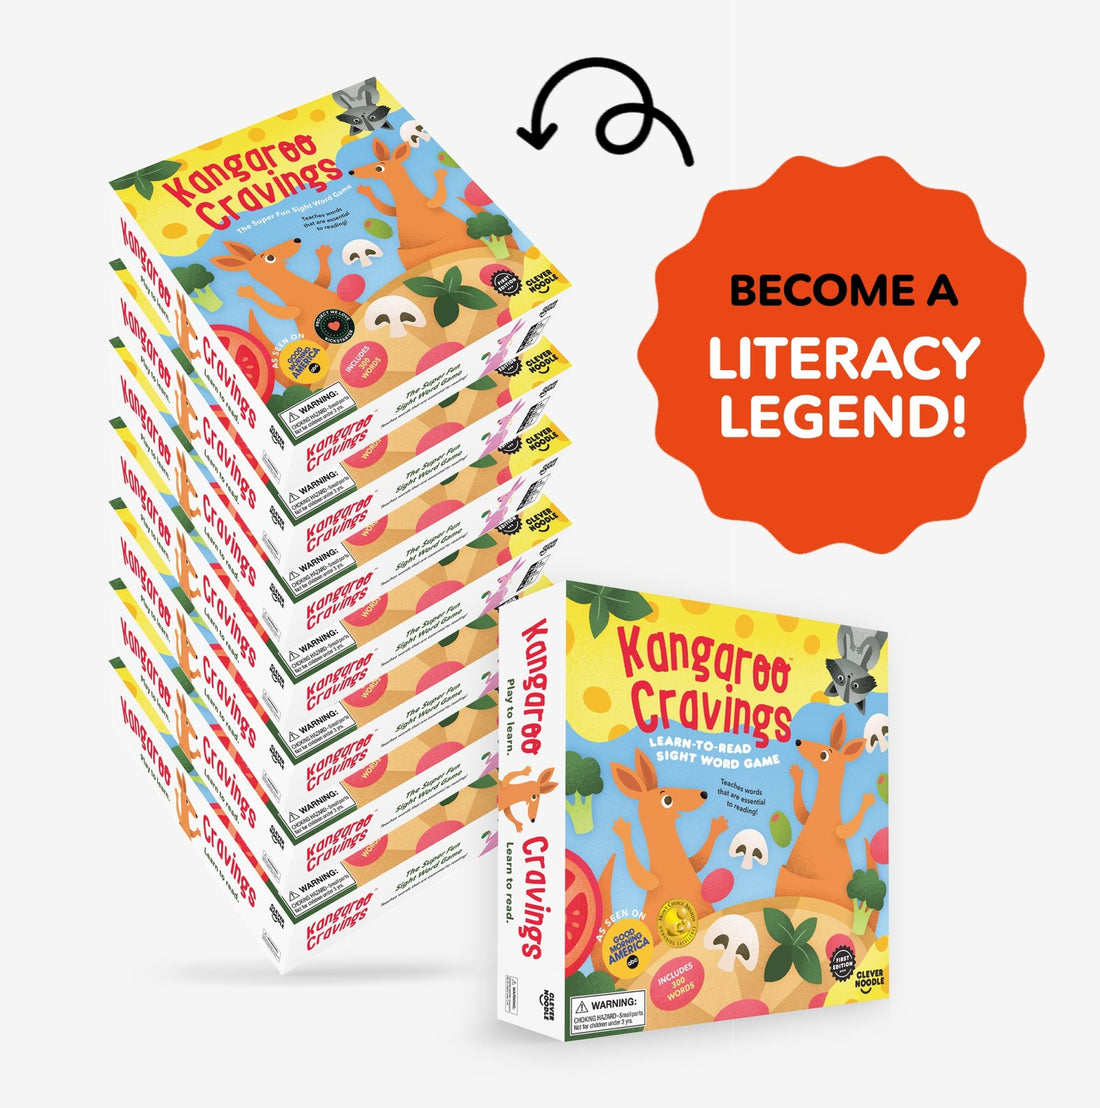 Become a Literacy Legend with donations of $250 or more. Receive a tax deduction letter.